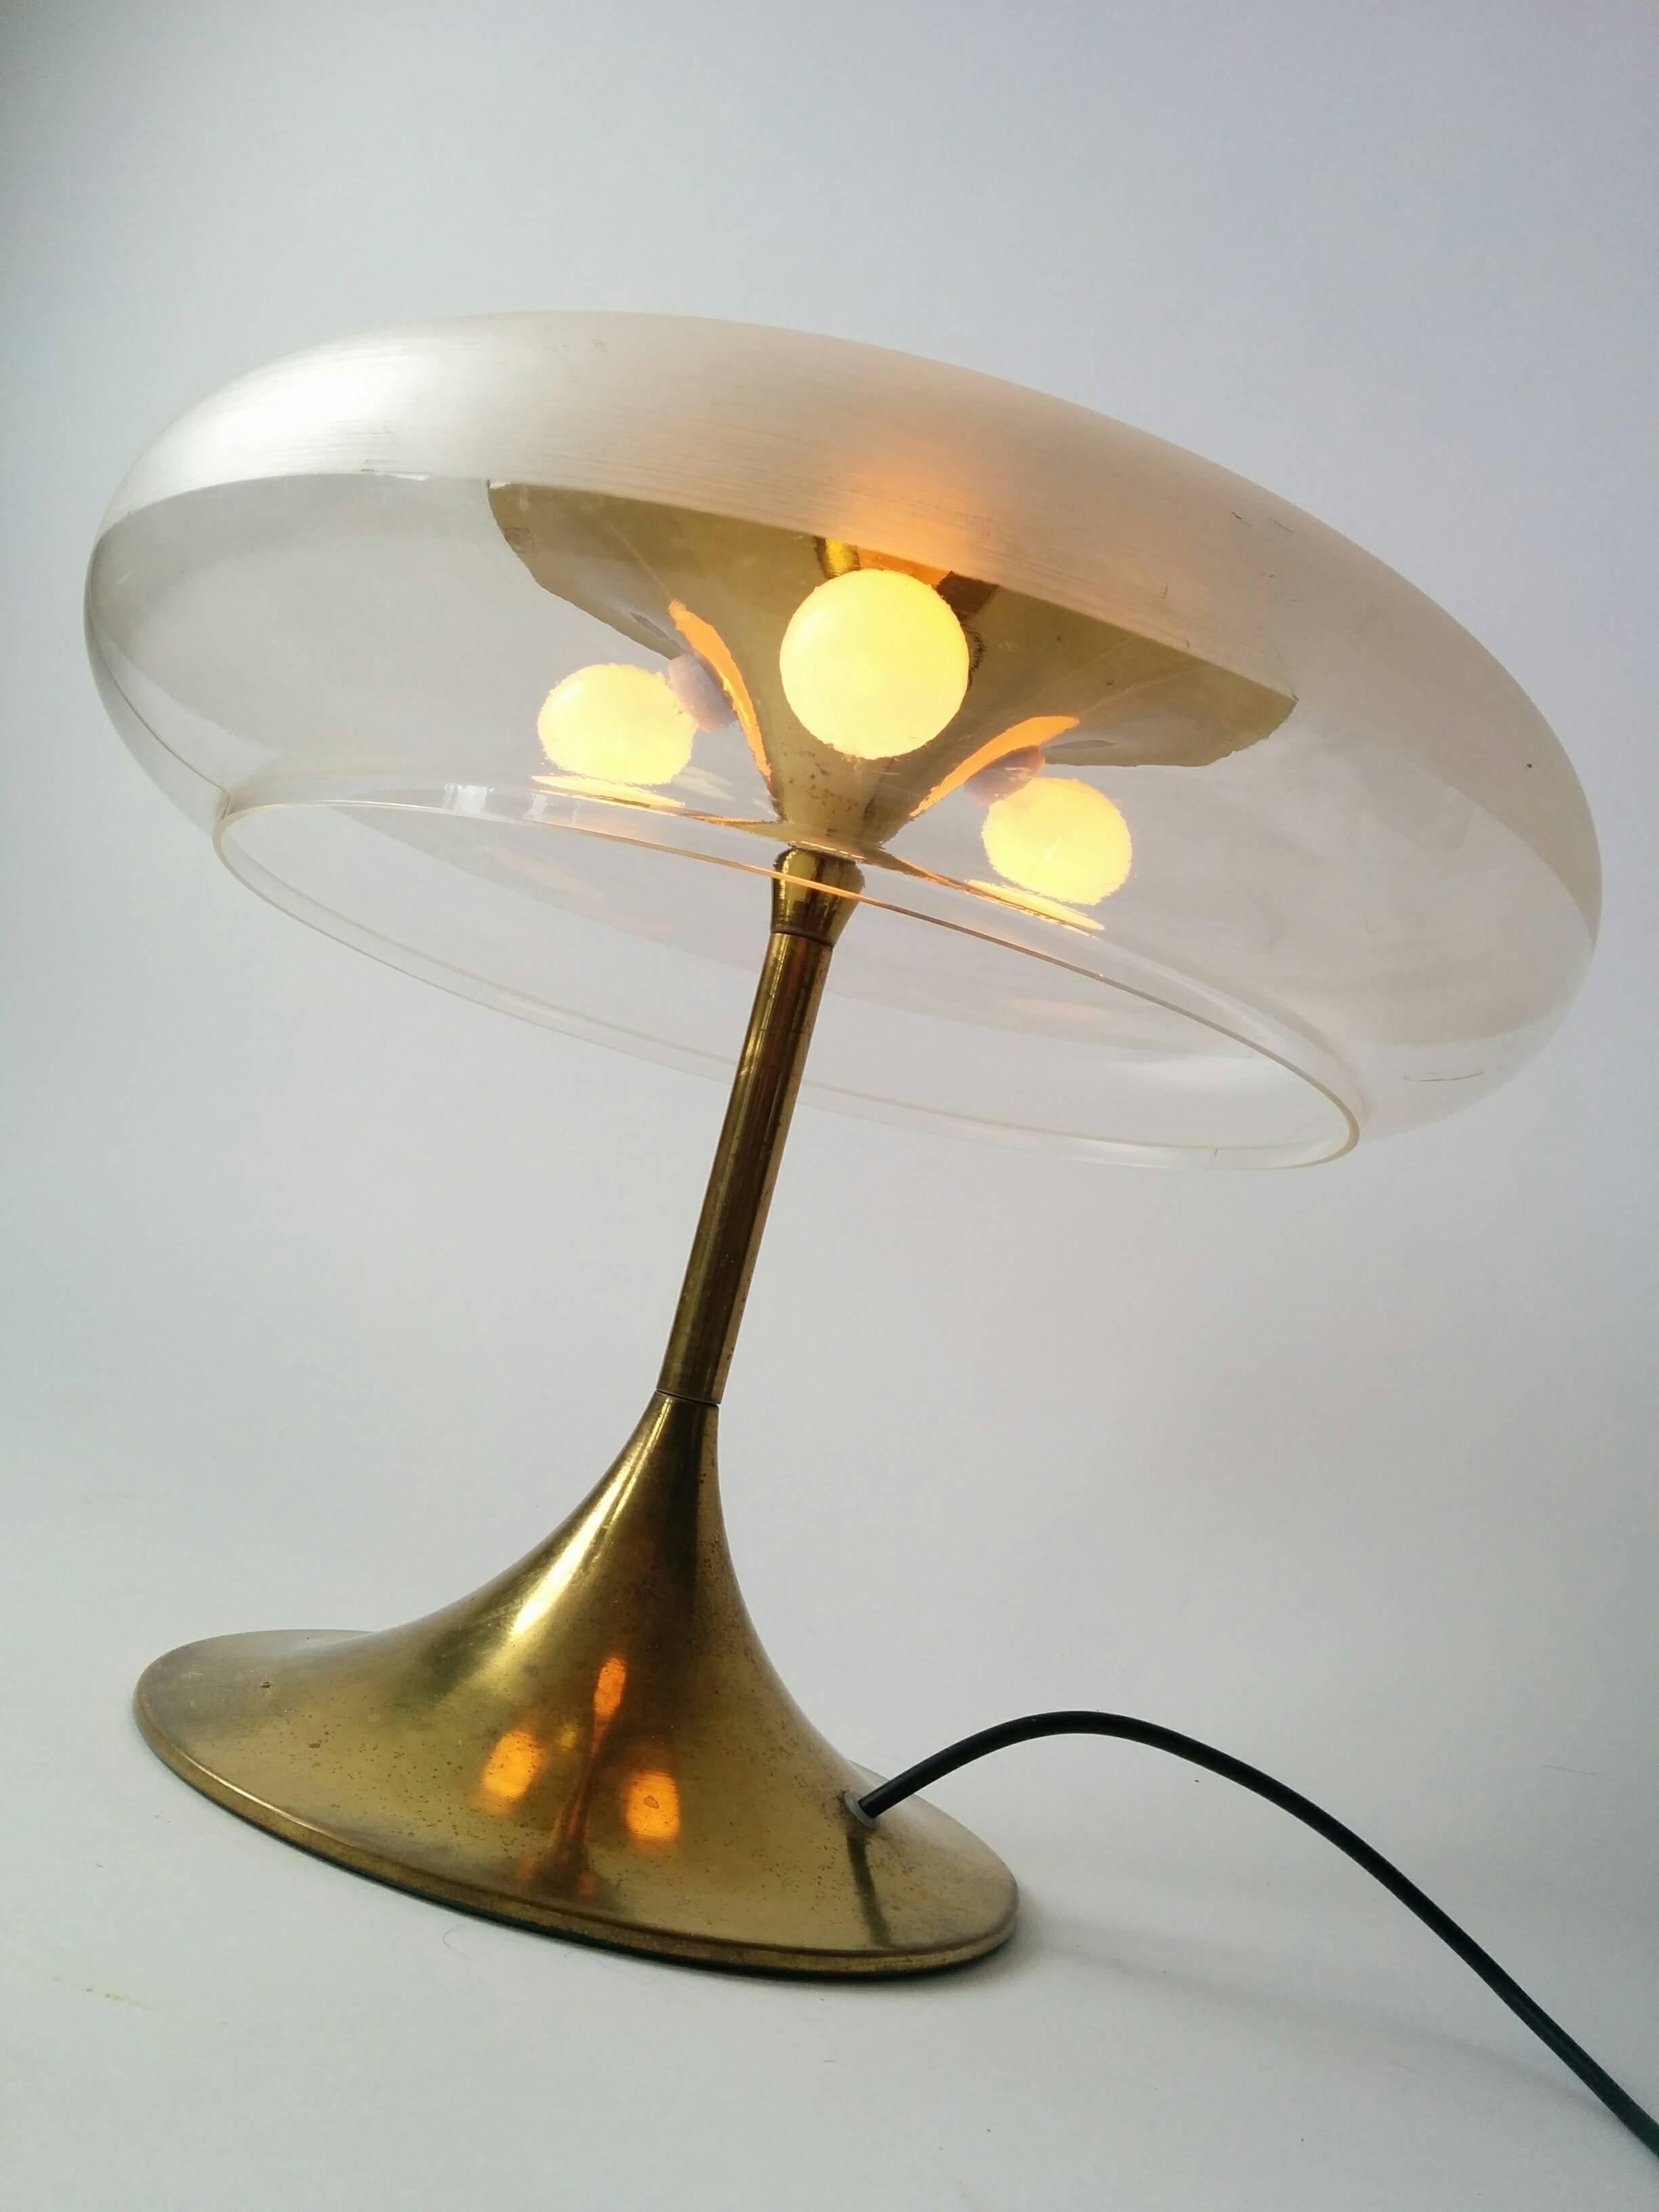 Sculptural mushroom shaped table lamp.

Three candelabra E12 socket.

16 inches high by 18 inches wide.

